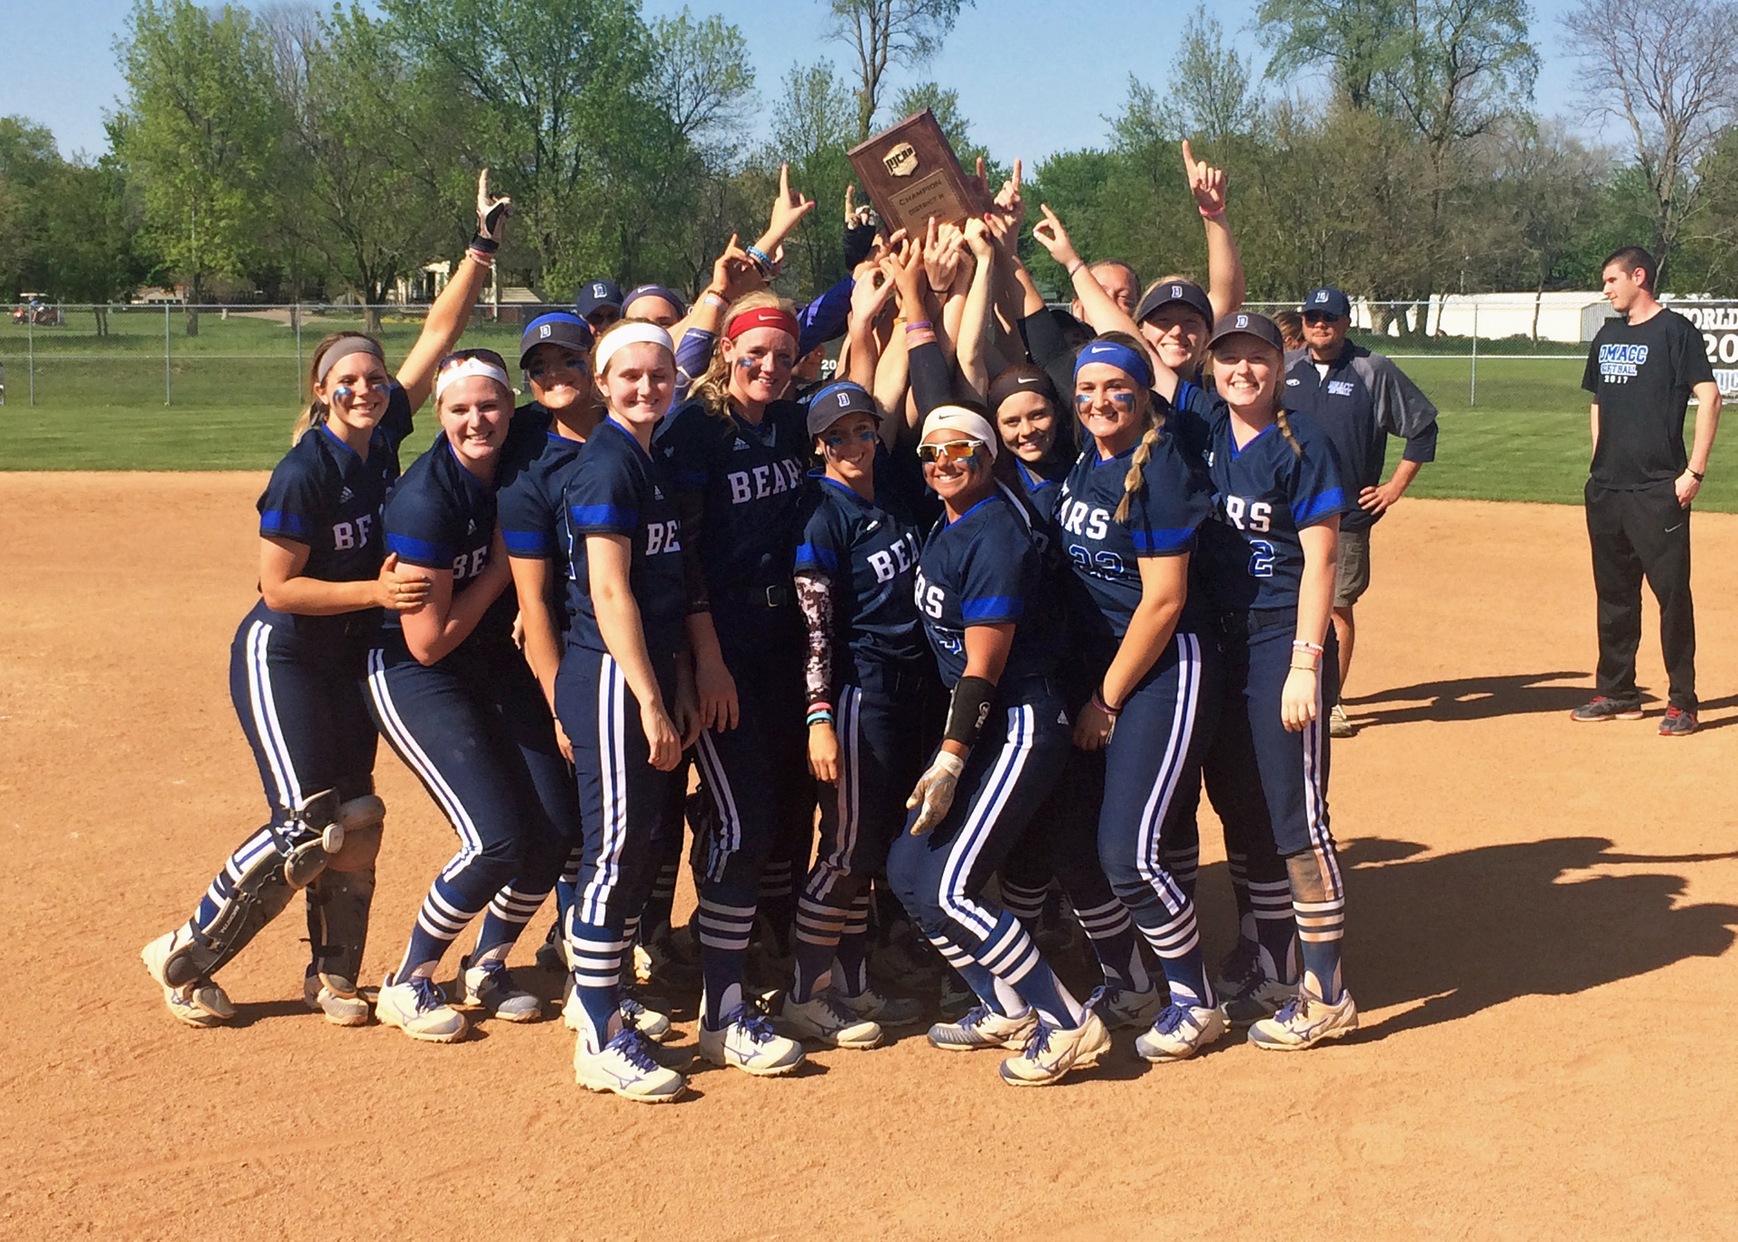 Bears hoist the District Trophy following clinching its fifth World Series berth in six seasons.